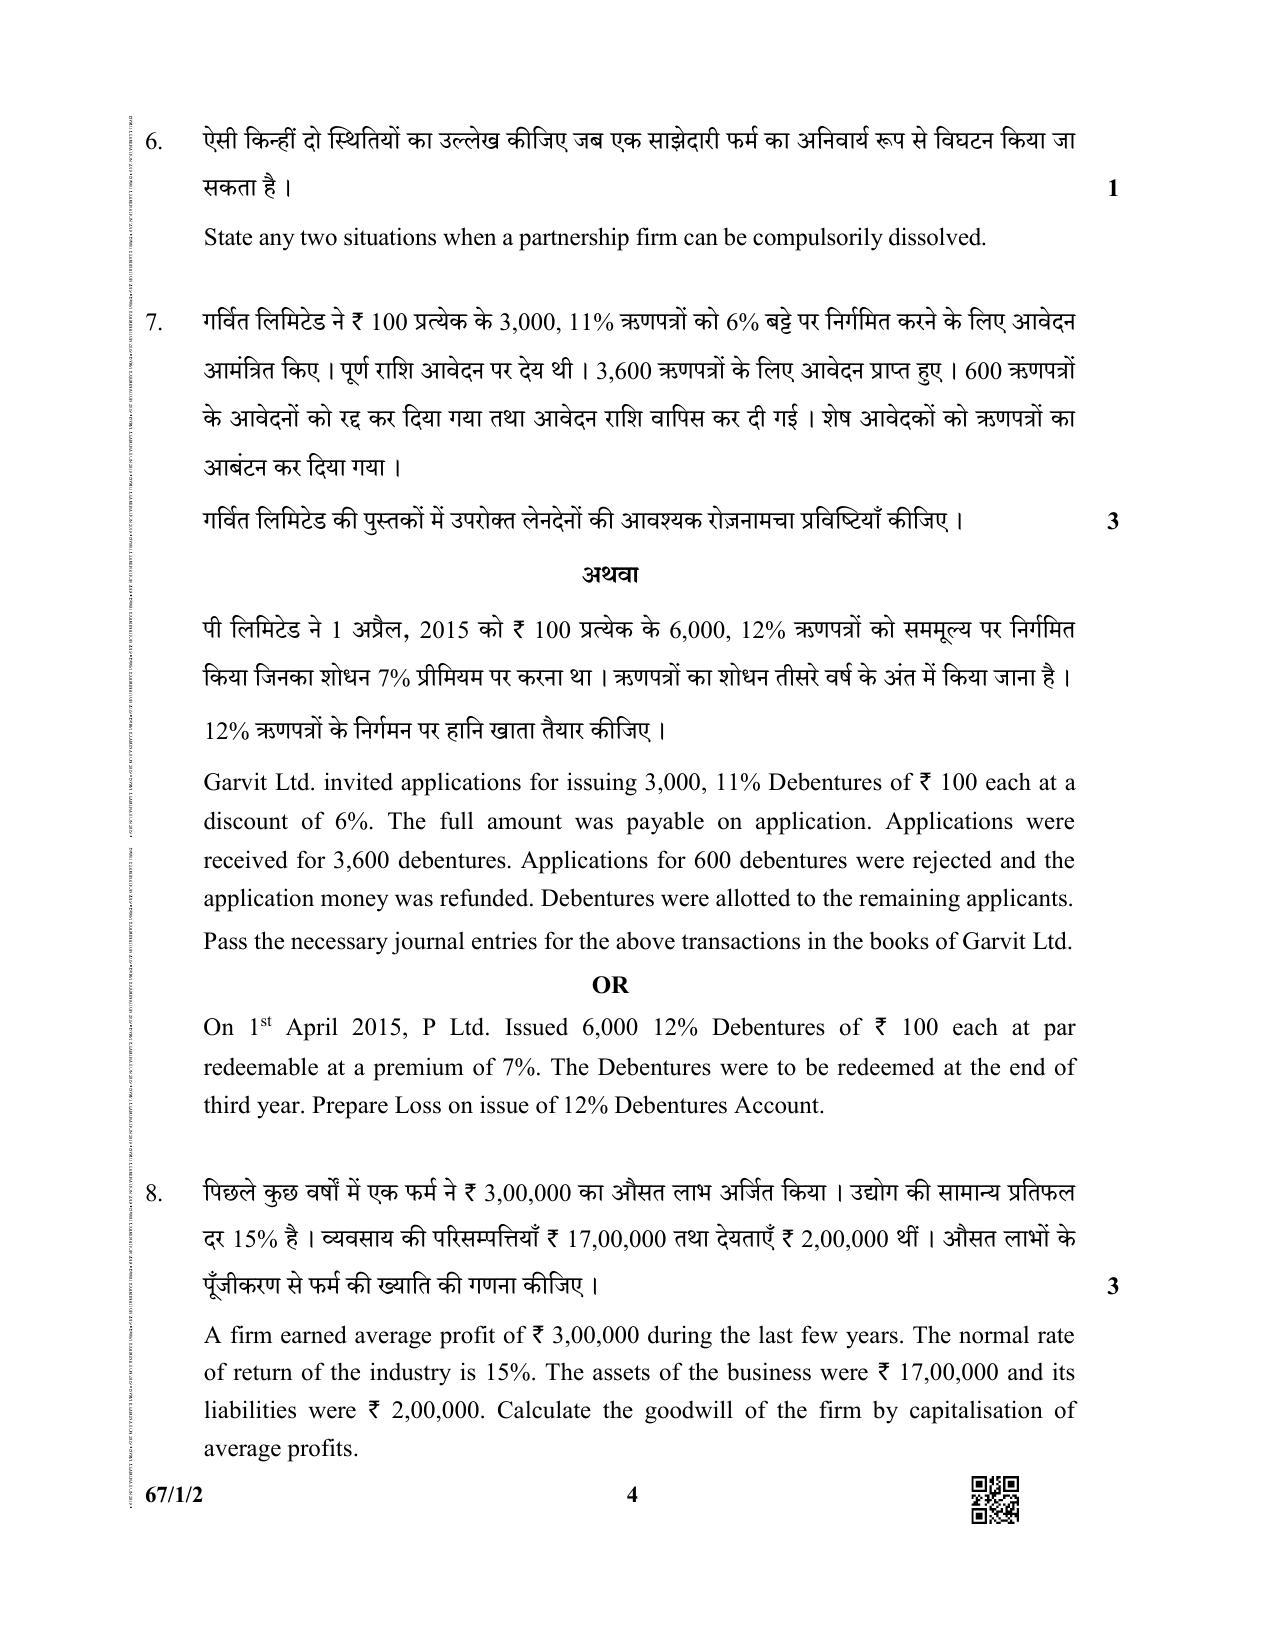 CBSE Class 12 67-1-2  (Accountancy) 2019 Question Paper - Page 4